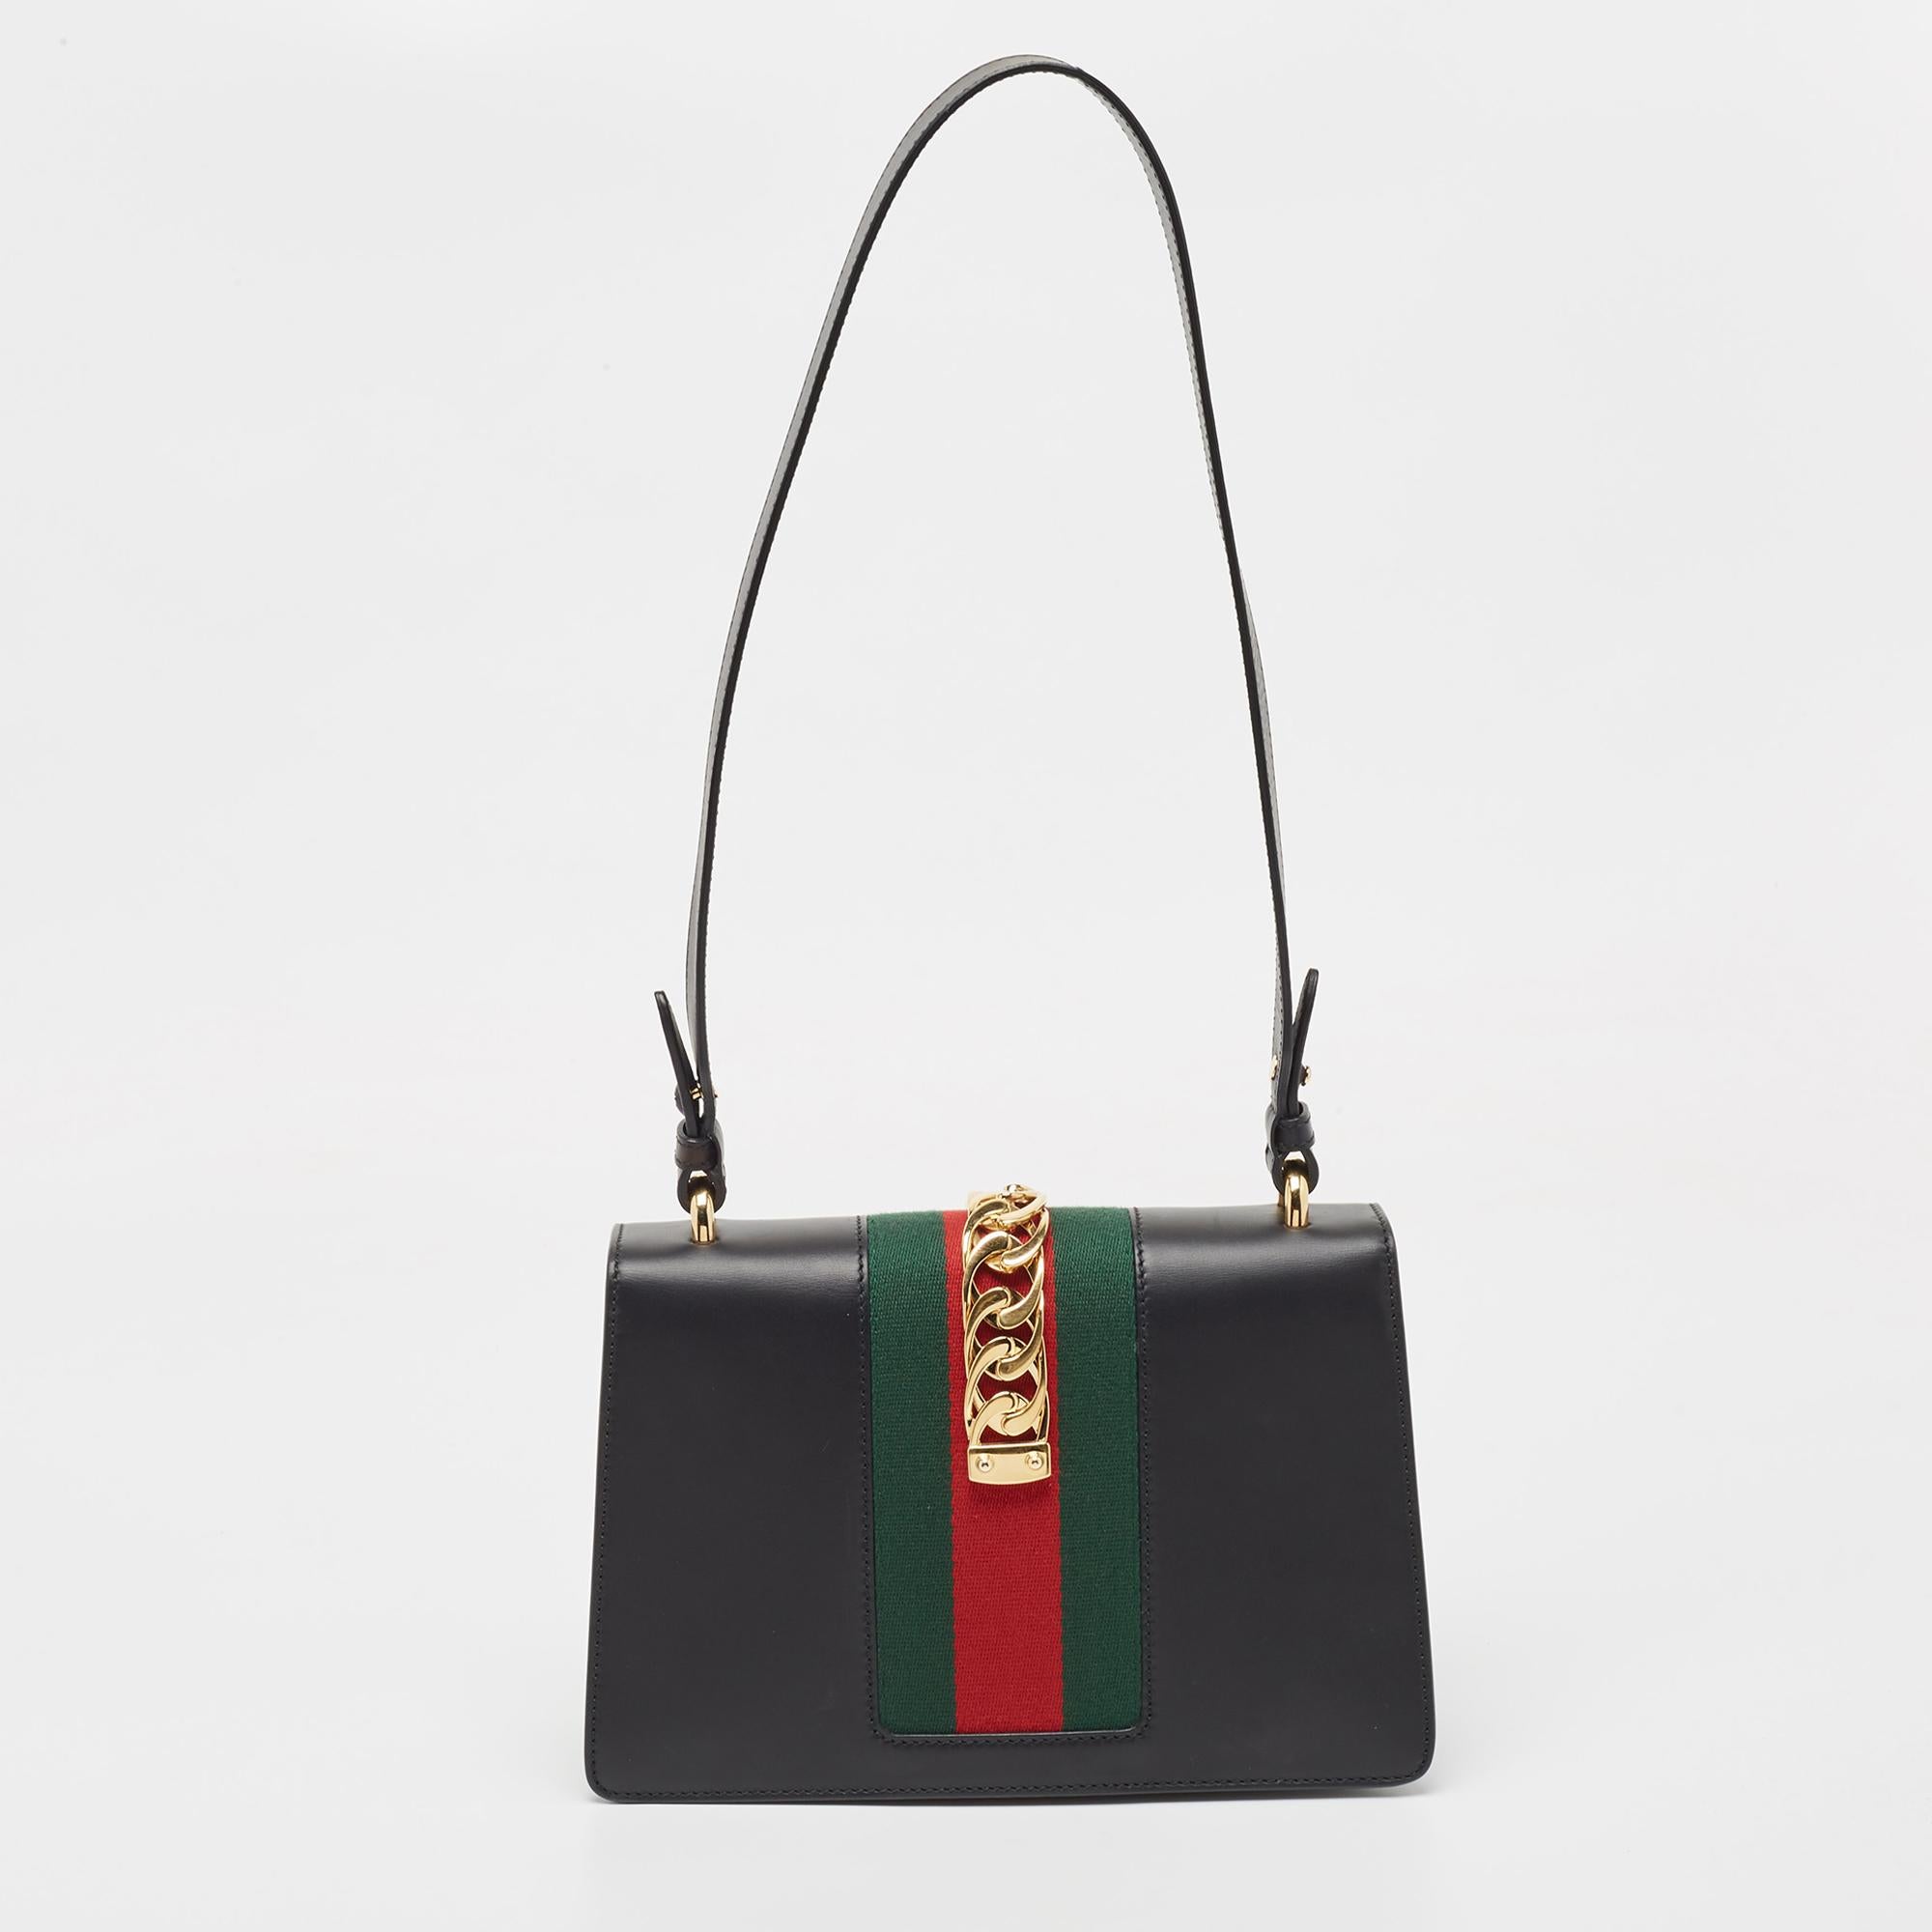 All the designs from Gucci, like this Sylvie bag, reflect a sense of innovation and tradition. Crafted from leather with a brand signature all over, it is admired for its alluring finish.

Includes: Original Dustbag, Info Booklet, Detachable Strap